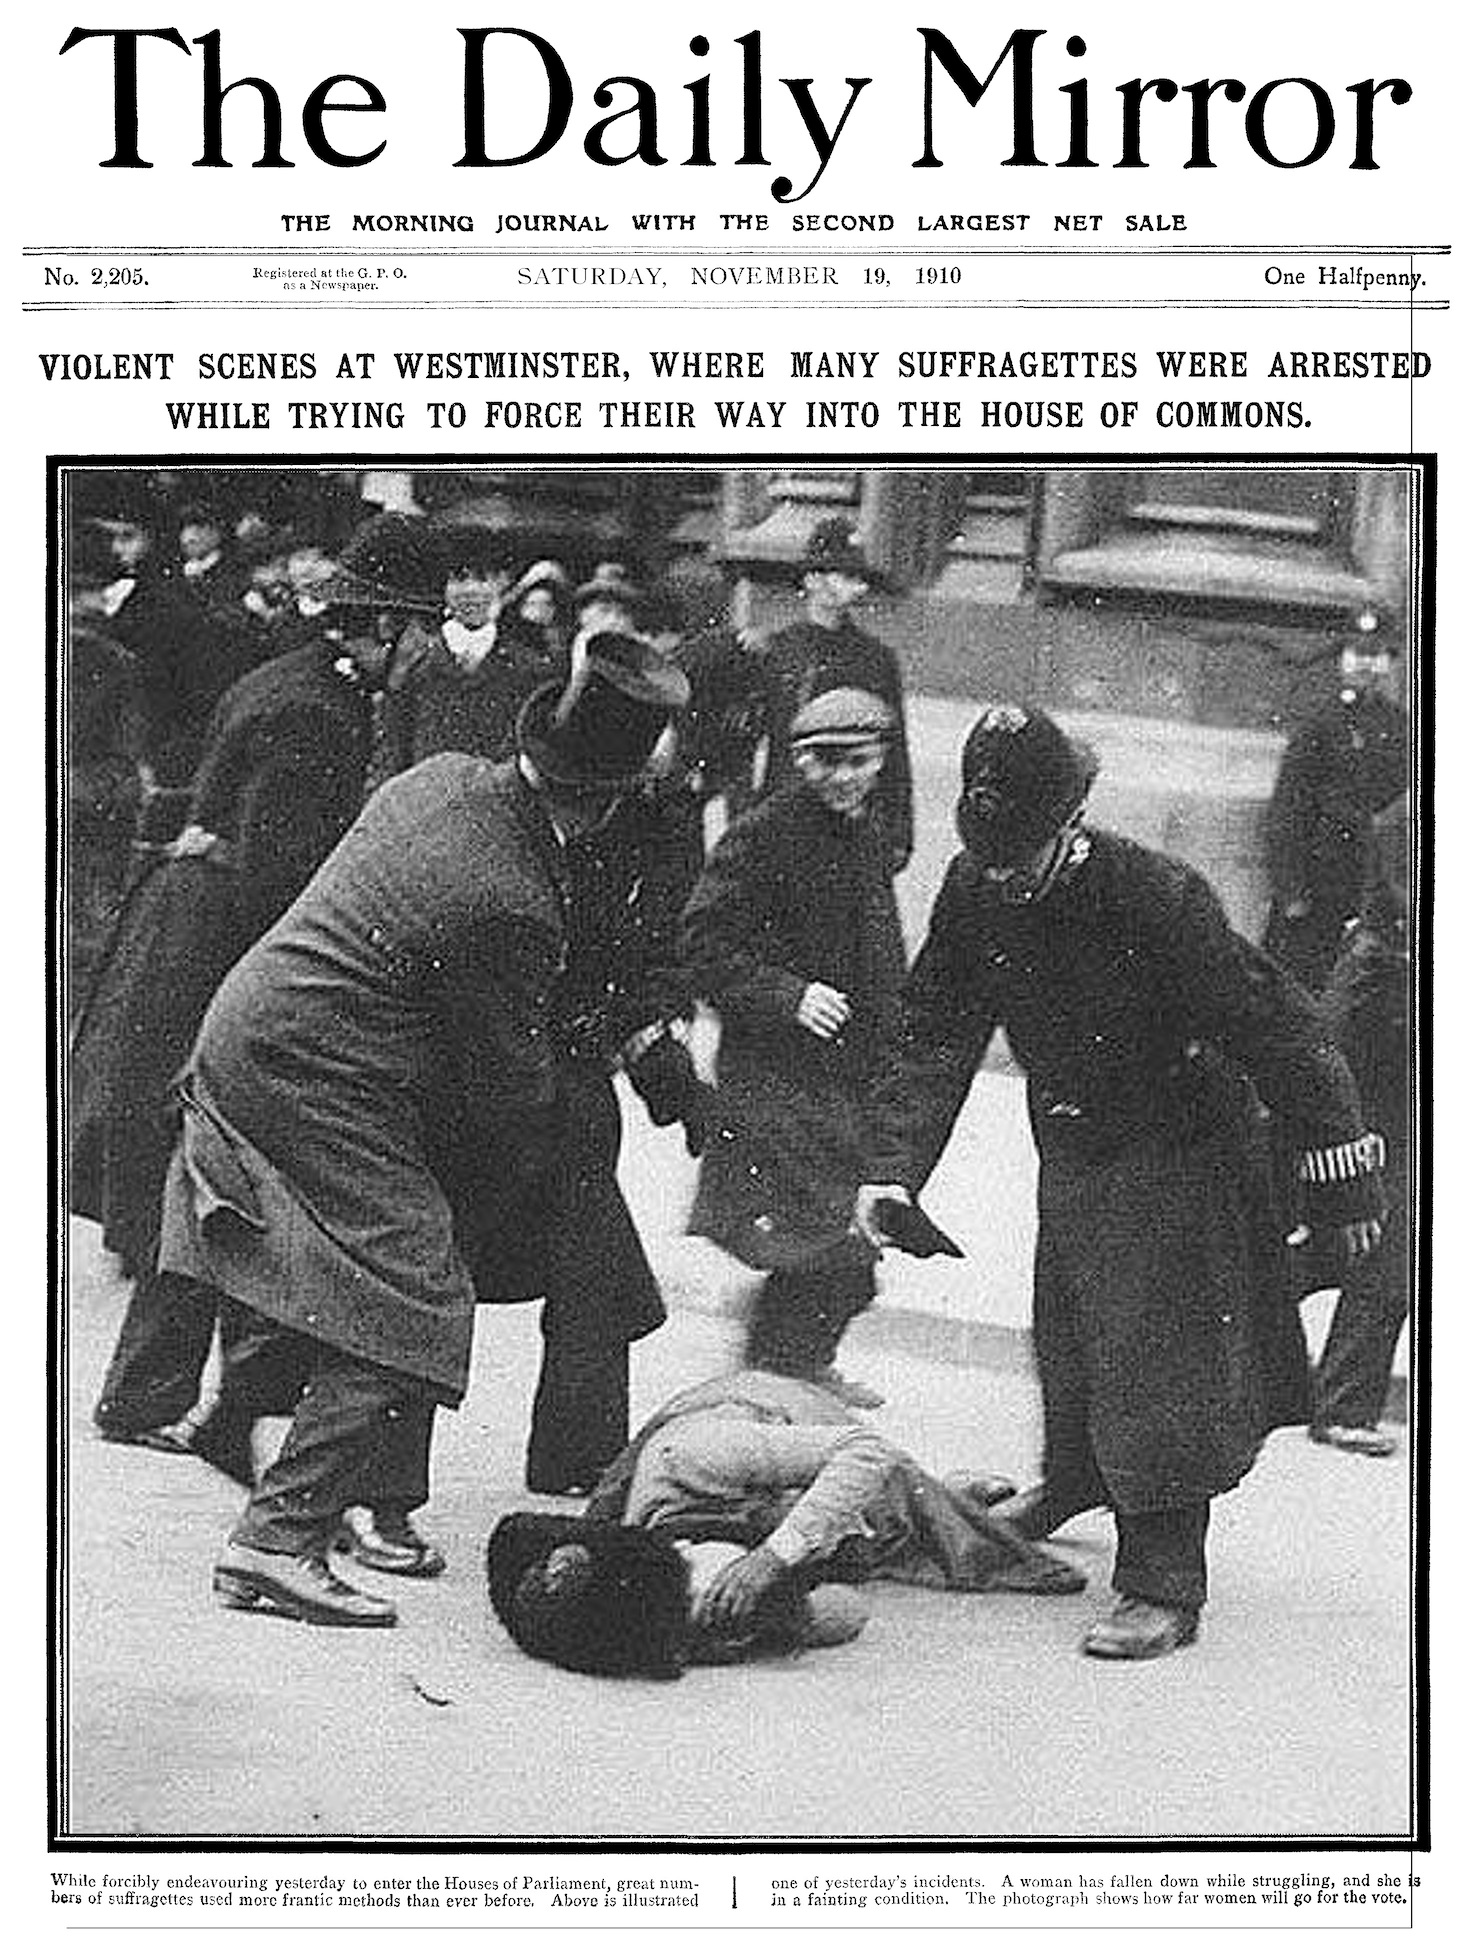 Black Friday in 1910 was a day of violence towards women